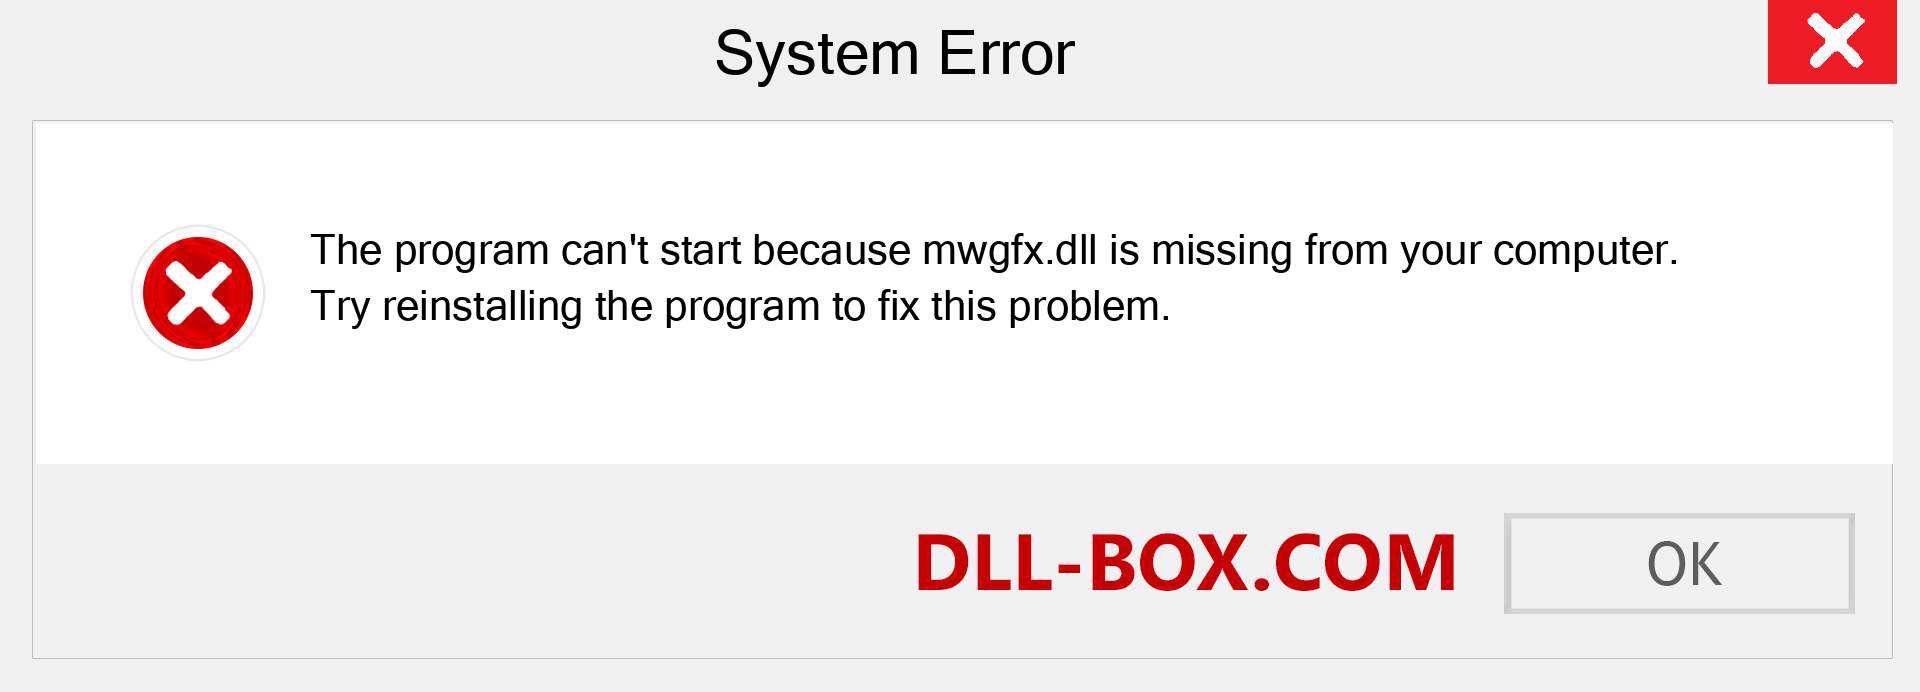  mwgfx.dll file is missing?. Download for Windows 7, 8, 10 - Fix  mwgfx dll Missing Error on Windows, photos, images